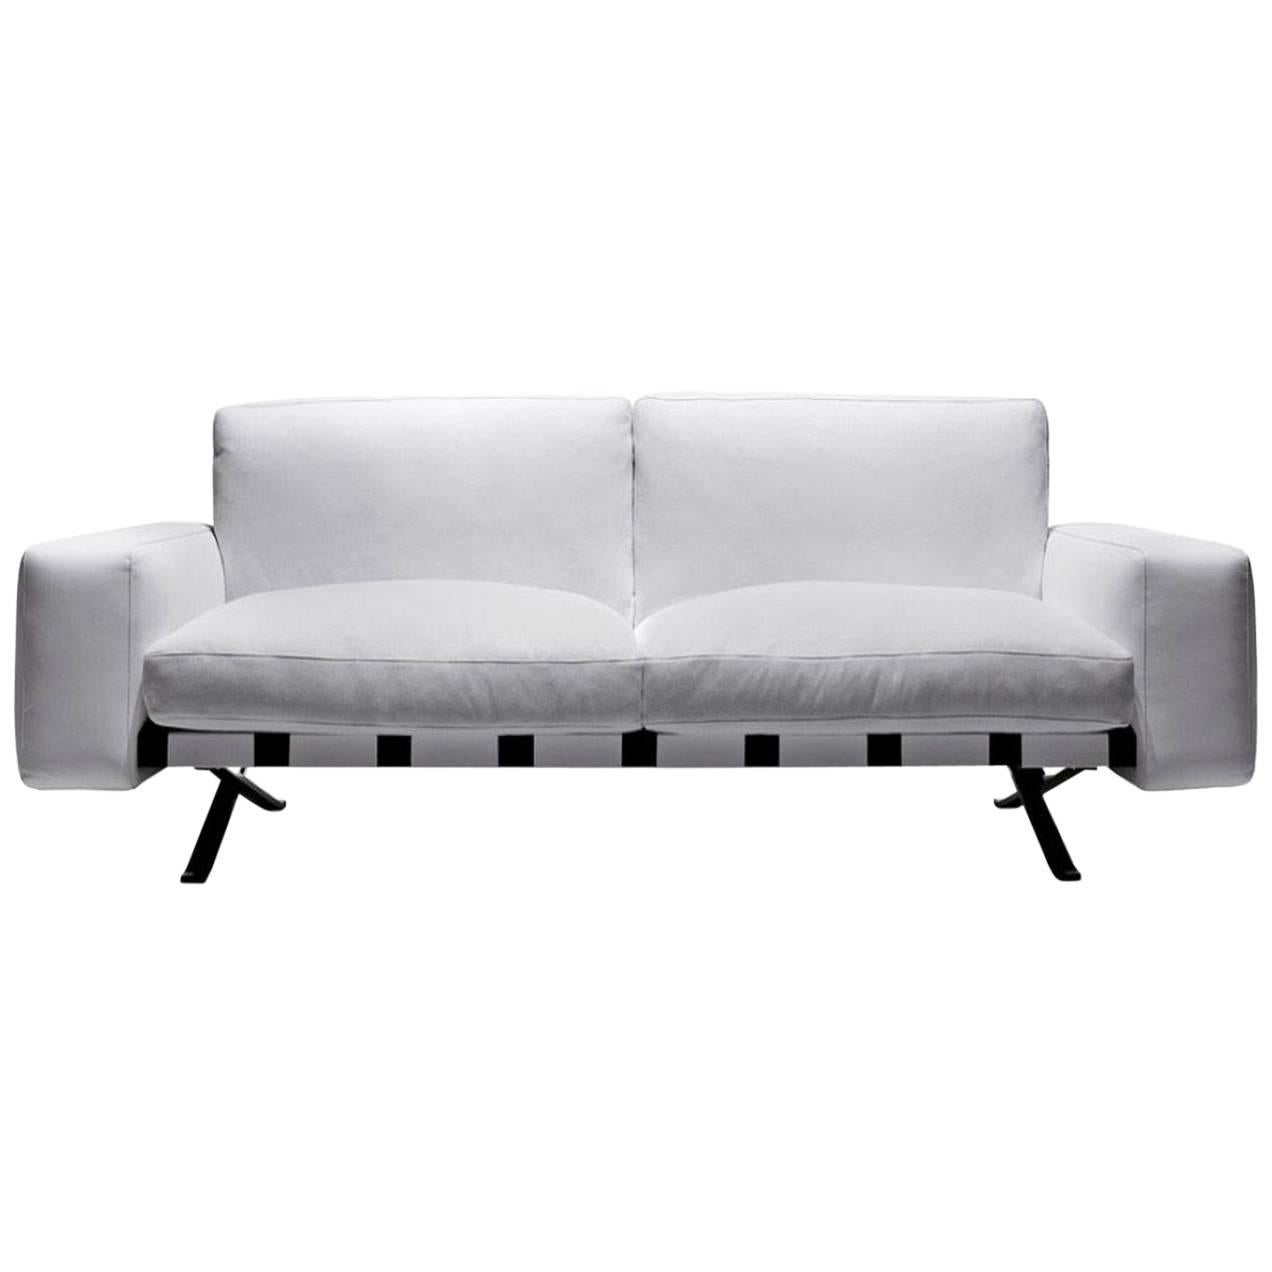 "Fenix" Two-Seat Sofa Designed by Ludovica and Roberto Palomba for Driade For Sale